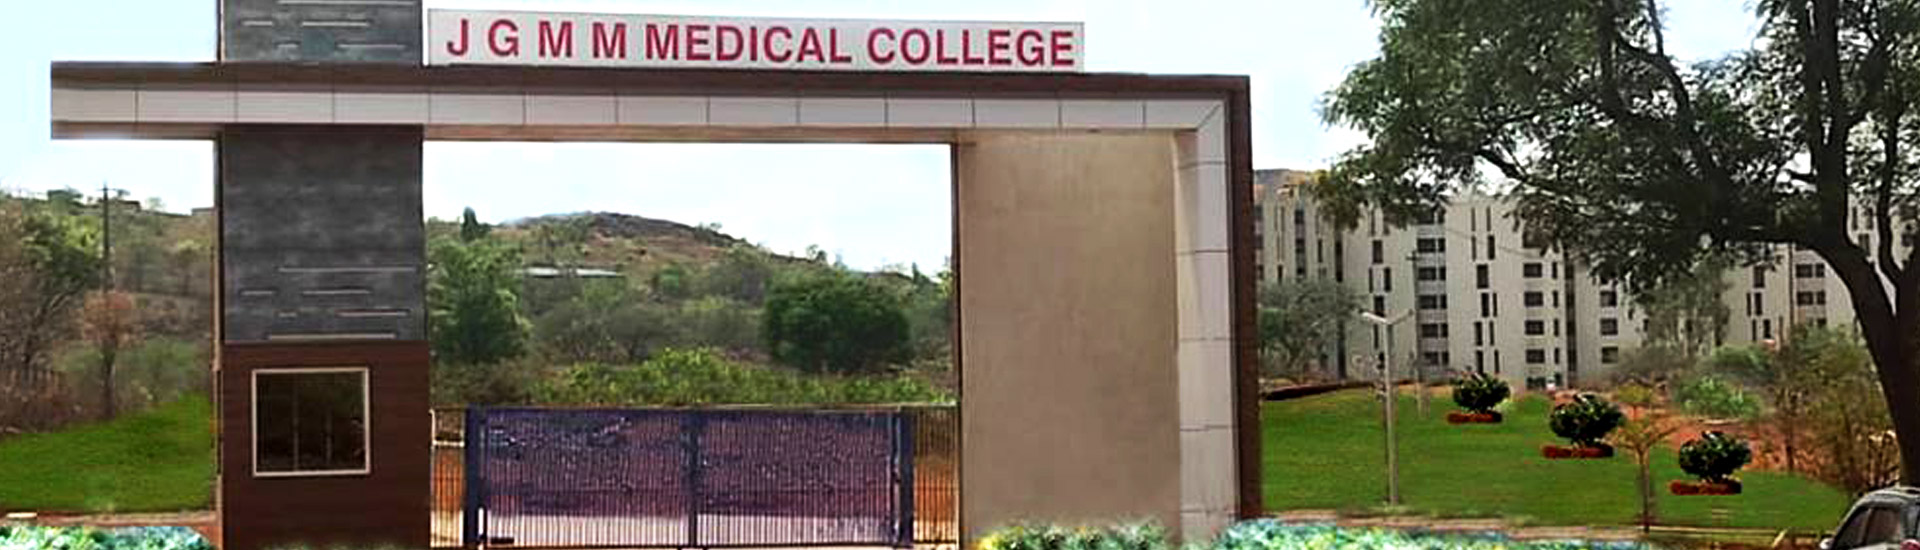 Jagadguru Gangadhar Mahaswamigalu Moorusavirmath Medical College Hubli 2022-23: Admission ,Courses,  Fee Structure, How to Apply, Eligibility, Cutoff, Result, Counselling, Contact Details